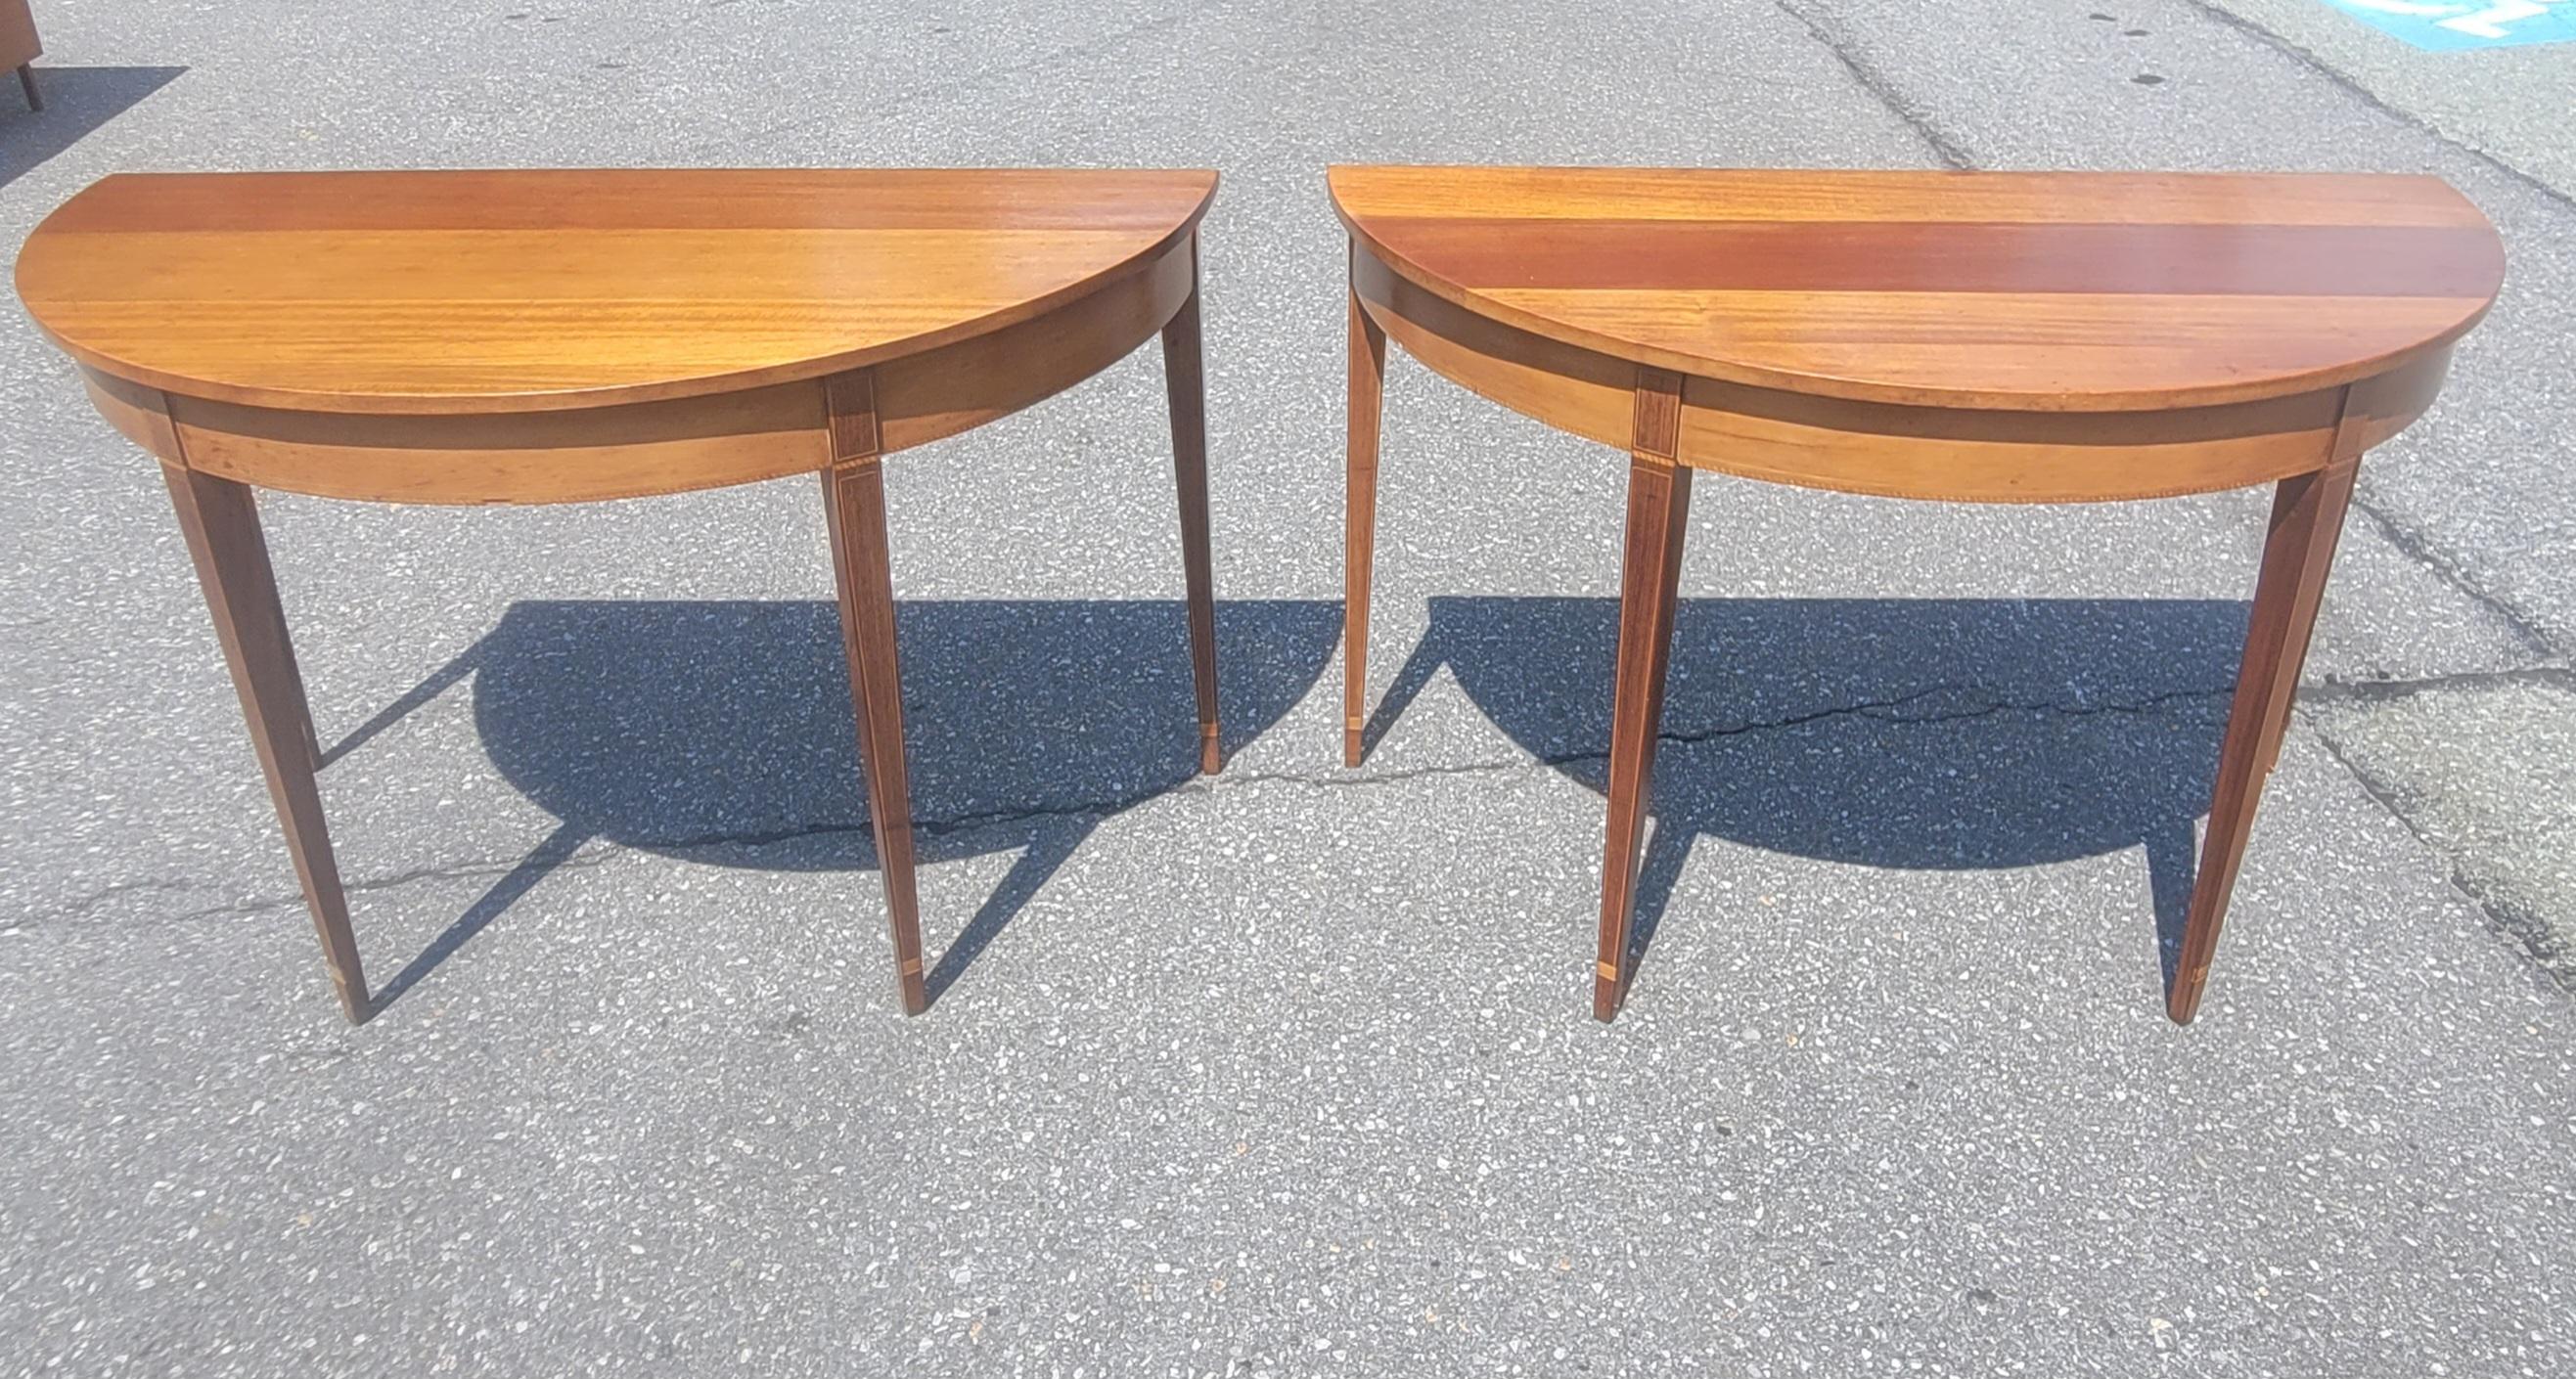 1930s American Federal Inlaid Mahogany 3-Part Banquet Table For Sale 9